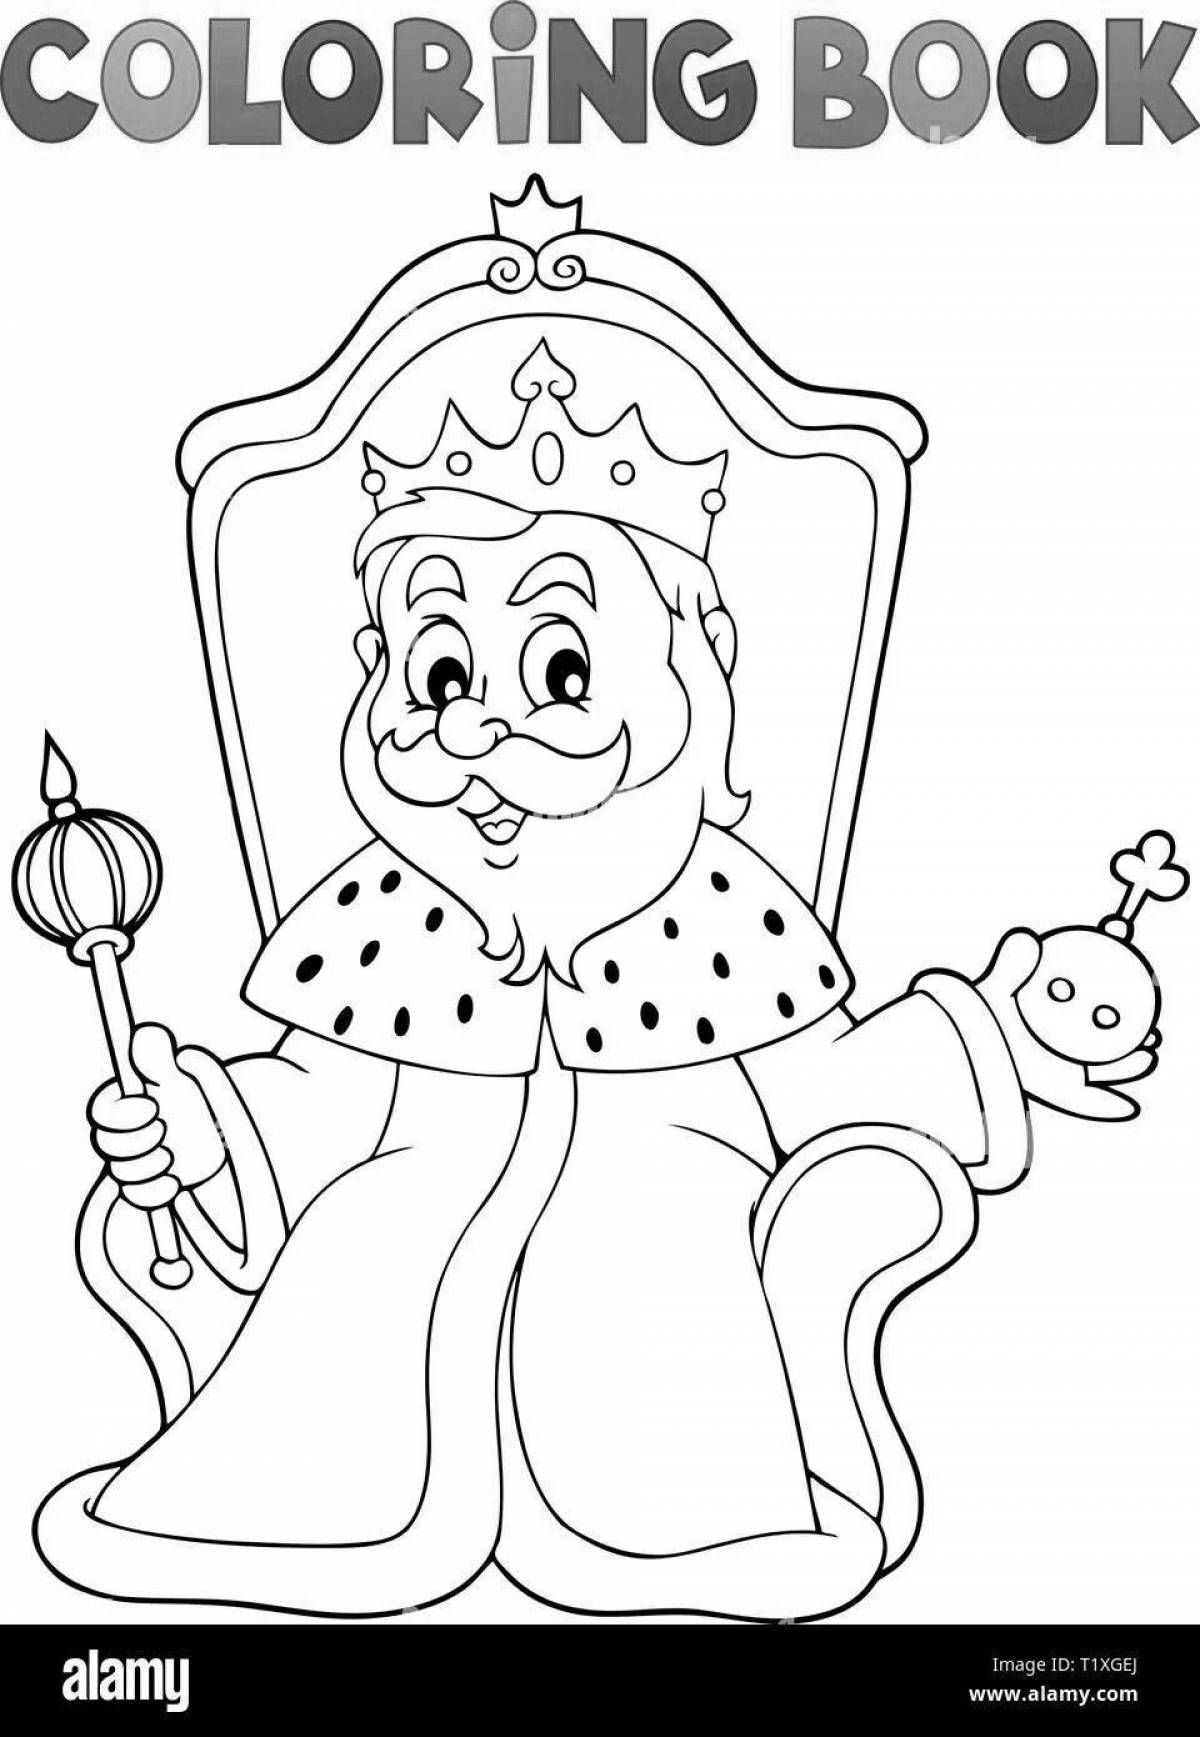 Majestic king coloring pages for kids